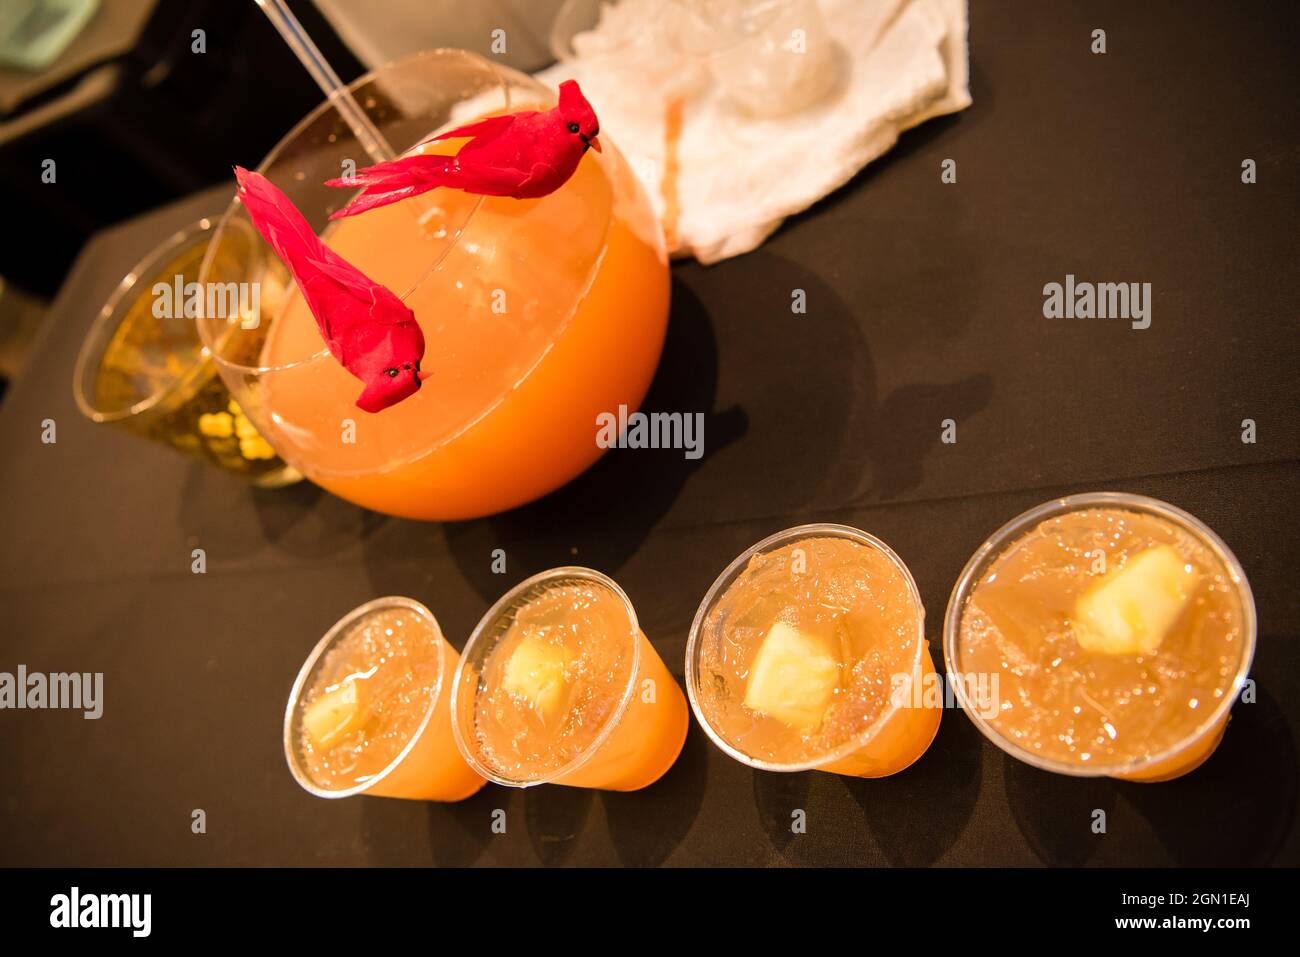 Orange citrus alcohol drinks with red cardinals sitting on the serving bowl. Stock Photo